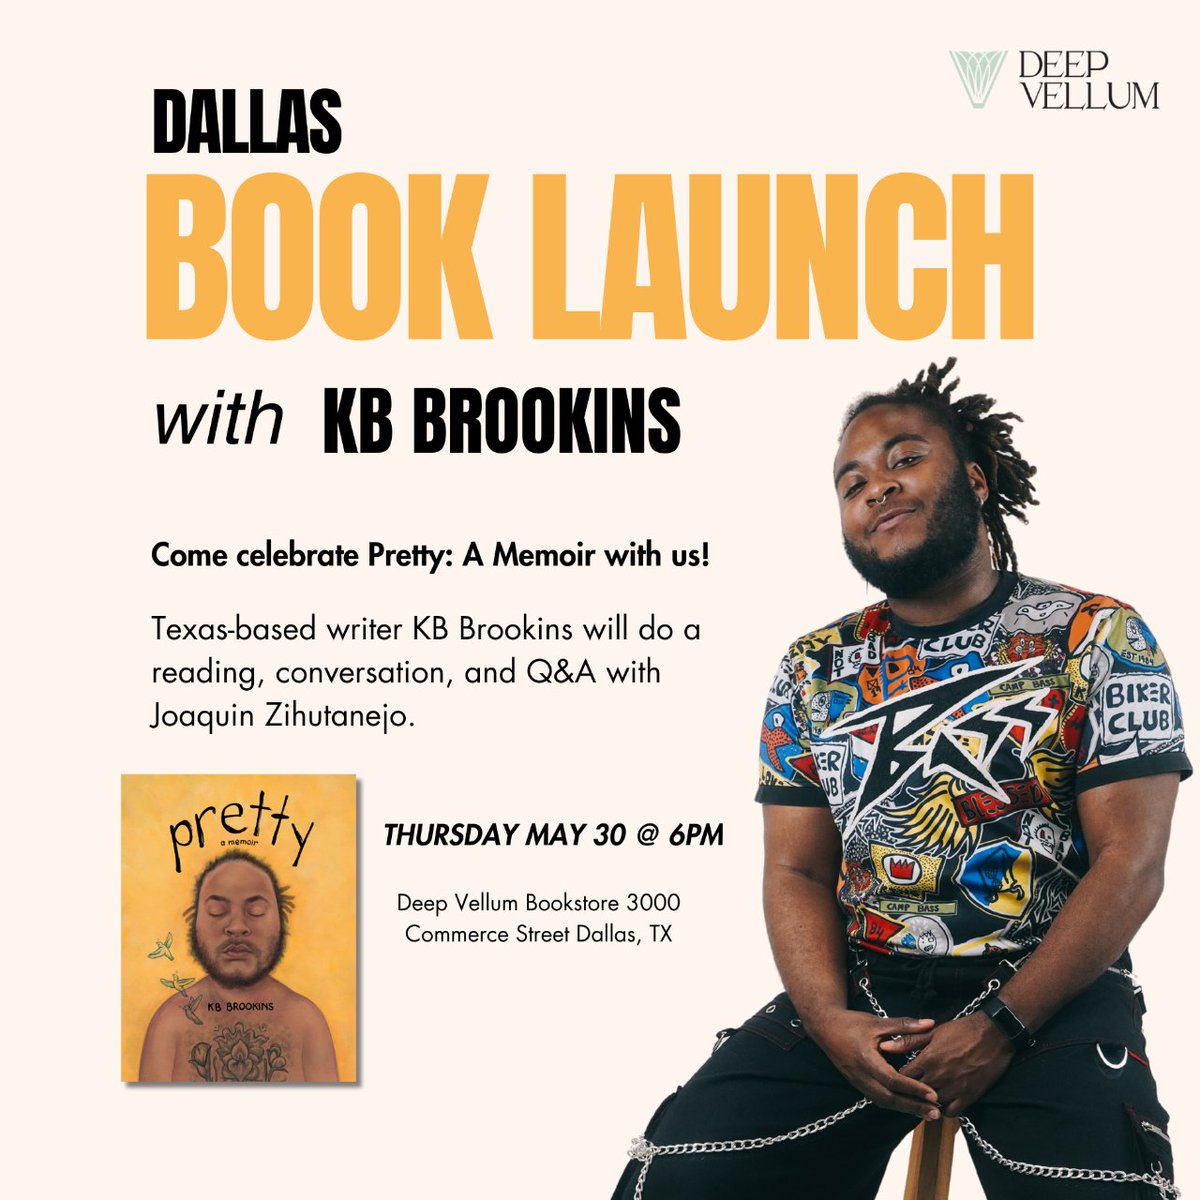 DALLAS! I'm in you 1 week from today ✨ ft. @thepoetjz 💛 ty to @DeepVellum for hosting us🫶🏾